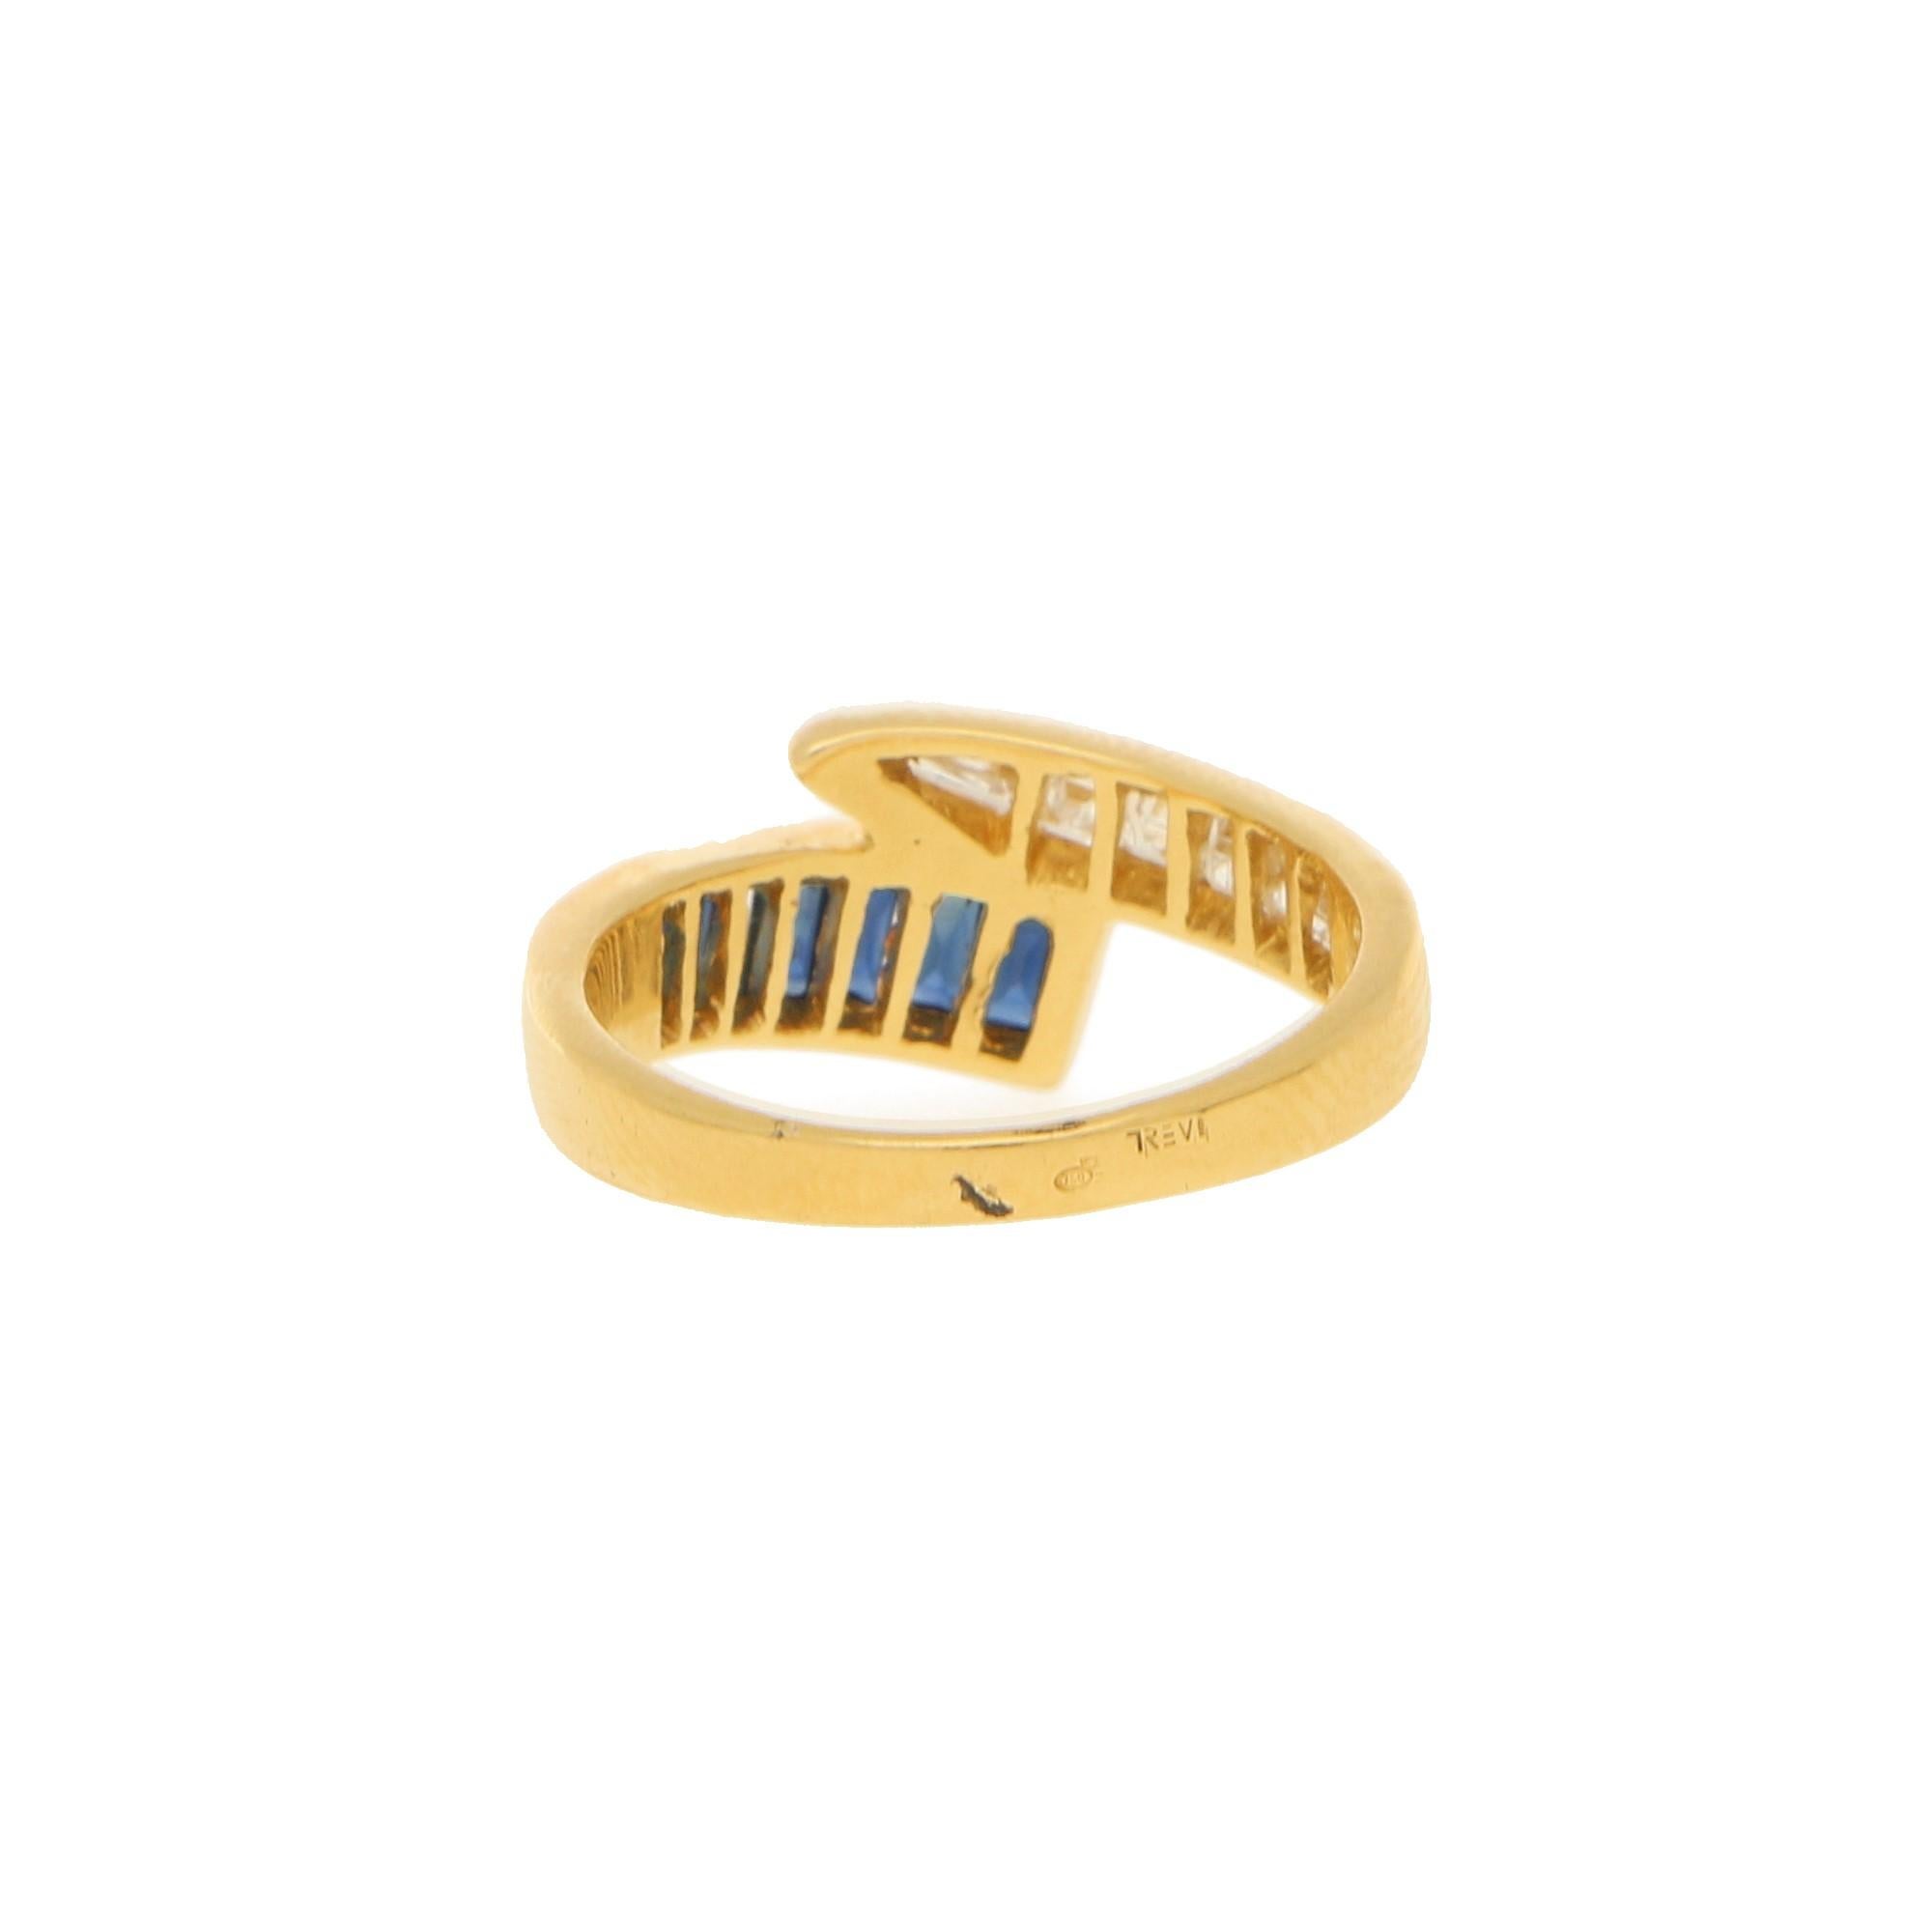 A sapphire and diamond half-eternity ring set in 18 karat yellow gold. 

The piece is designed as a half-eternity ring of a fancy crossover design, one side channel-set with calibre baguette-cut sapphires and the other side with calibre carre-cut